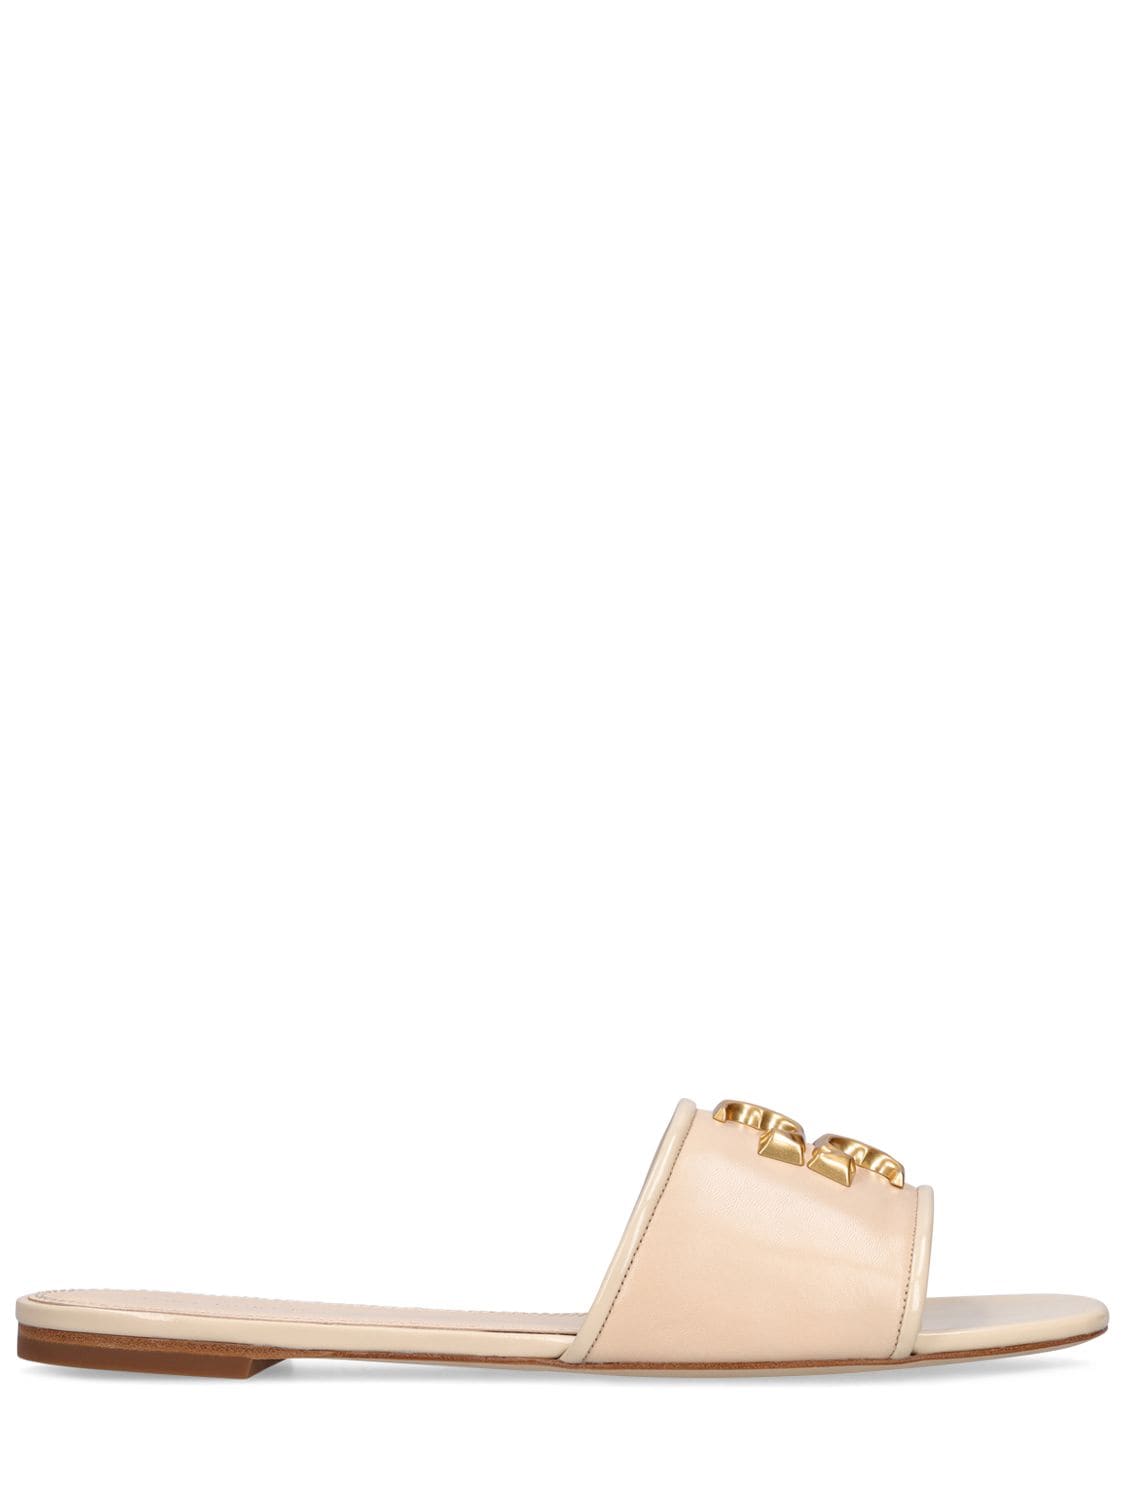 Tory Burch 10mm Eleanor Leather Slide Sandals In Cream